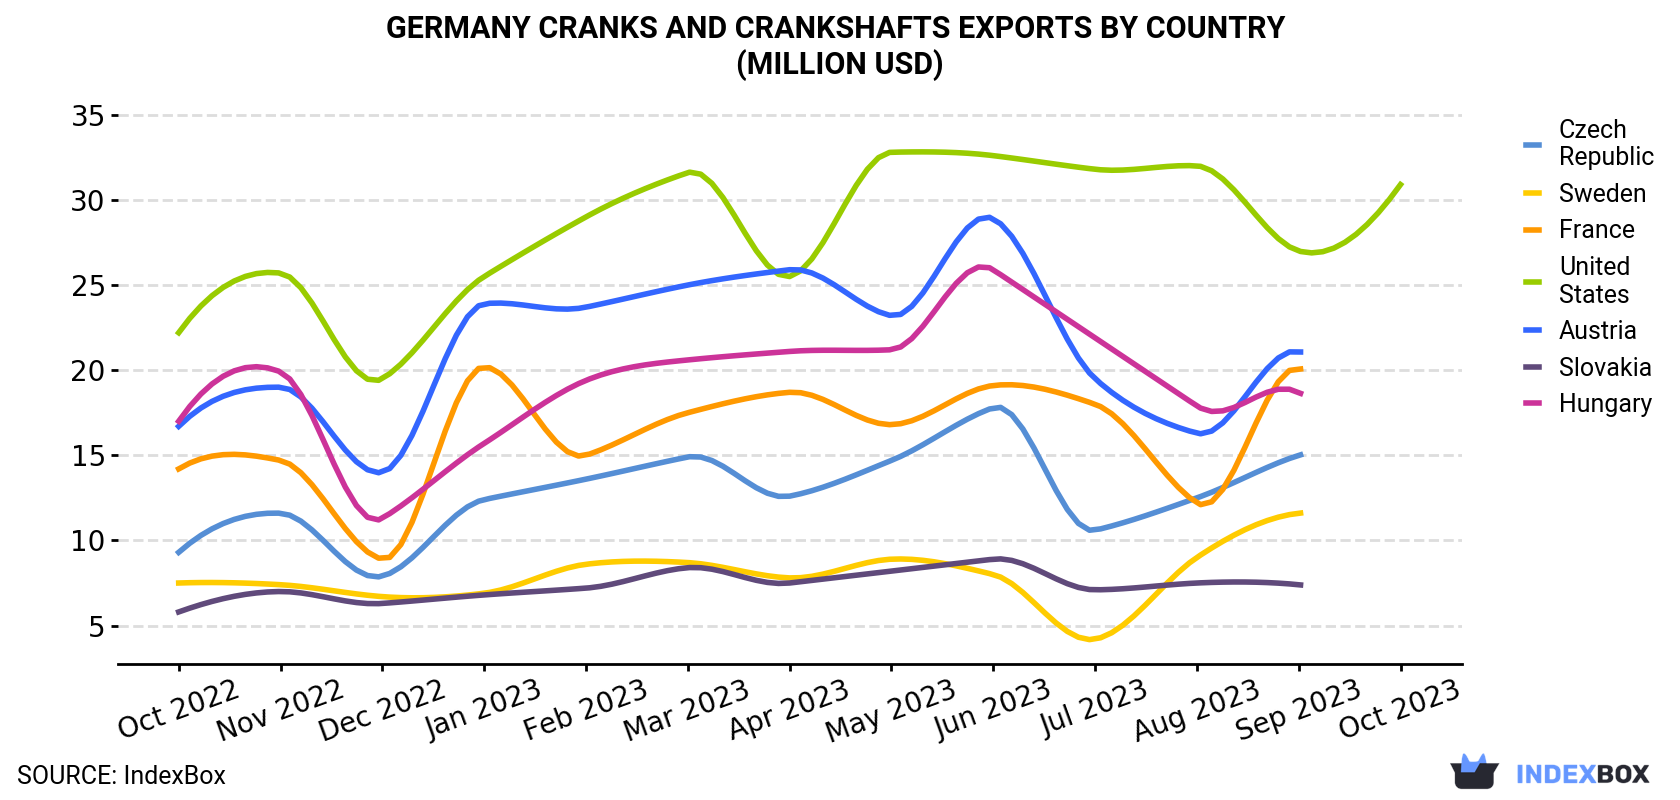 Germany Cranks And Crankshafts Exports By Country (Million USD)